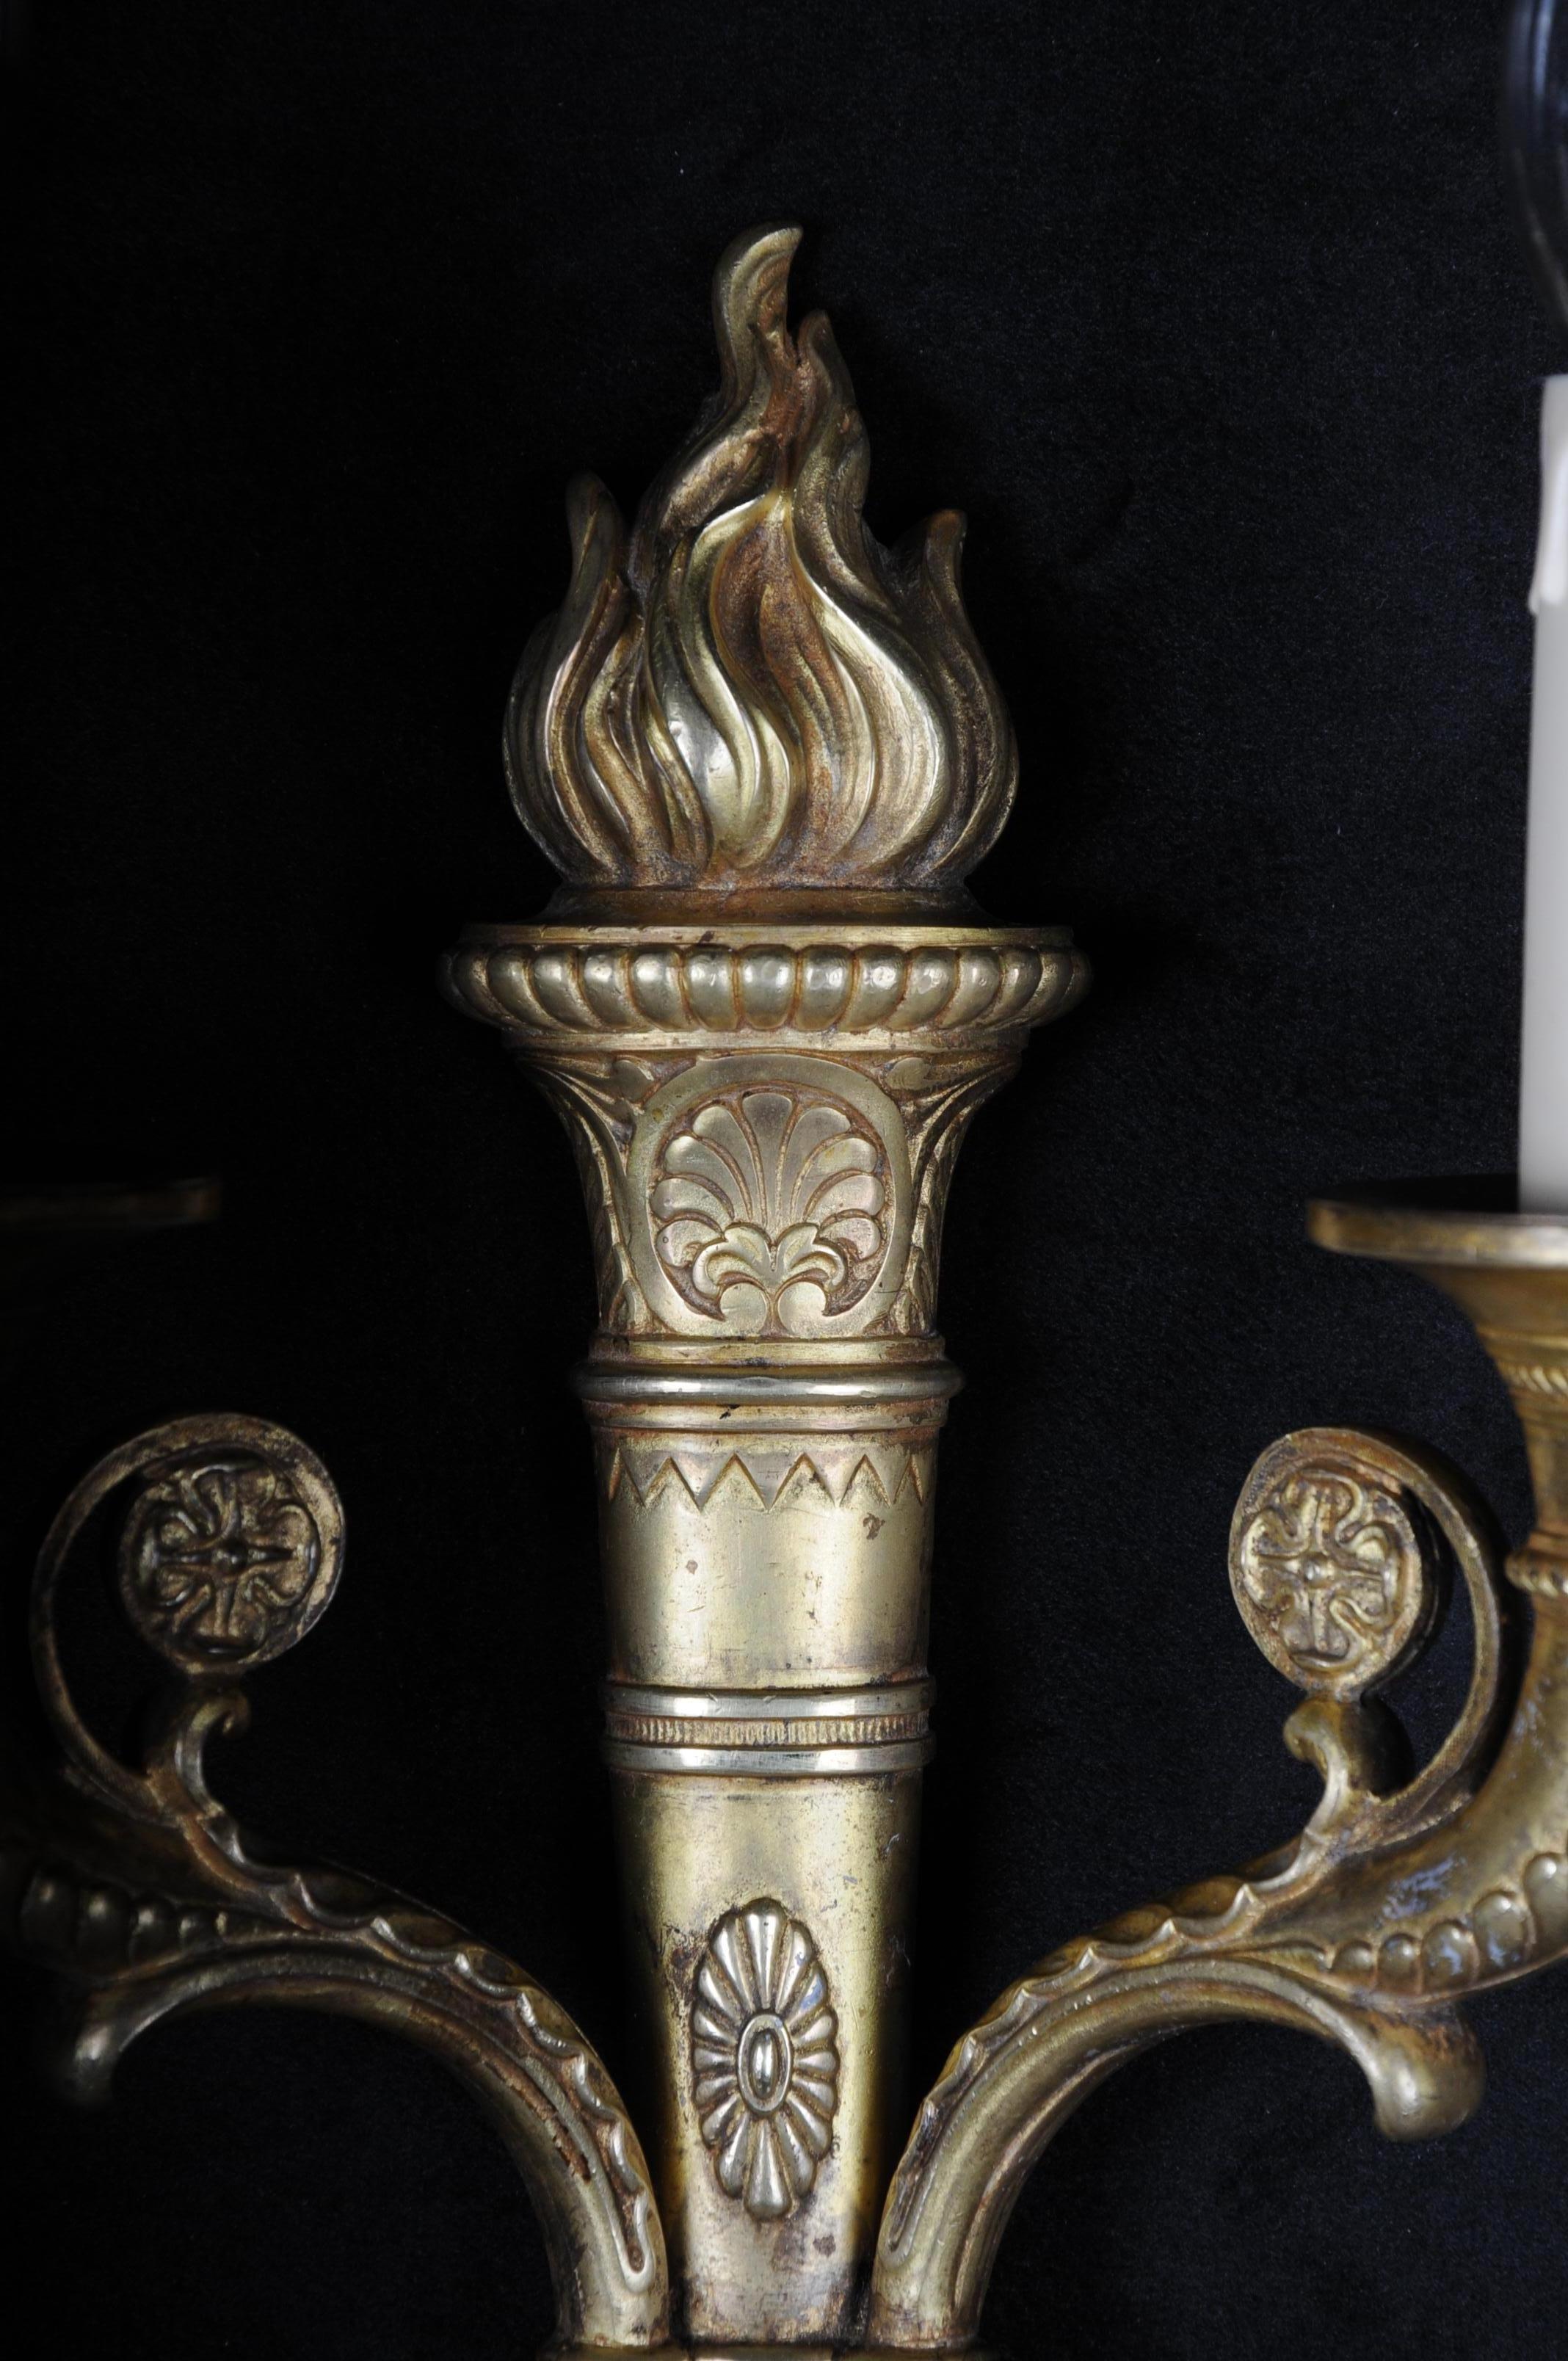 French wall sconce applique in Empire style circa 1900 bronze
Gilded bronze, torch-shaped shaft, two arms shaped like cornucopia. Electrified.

(F-105).